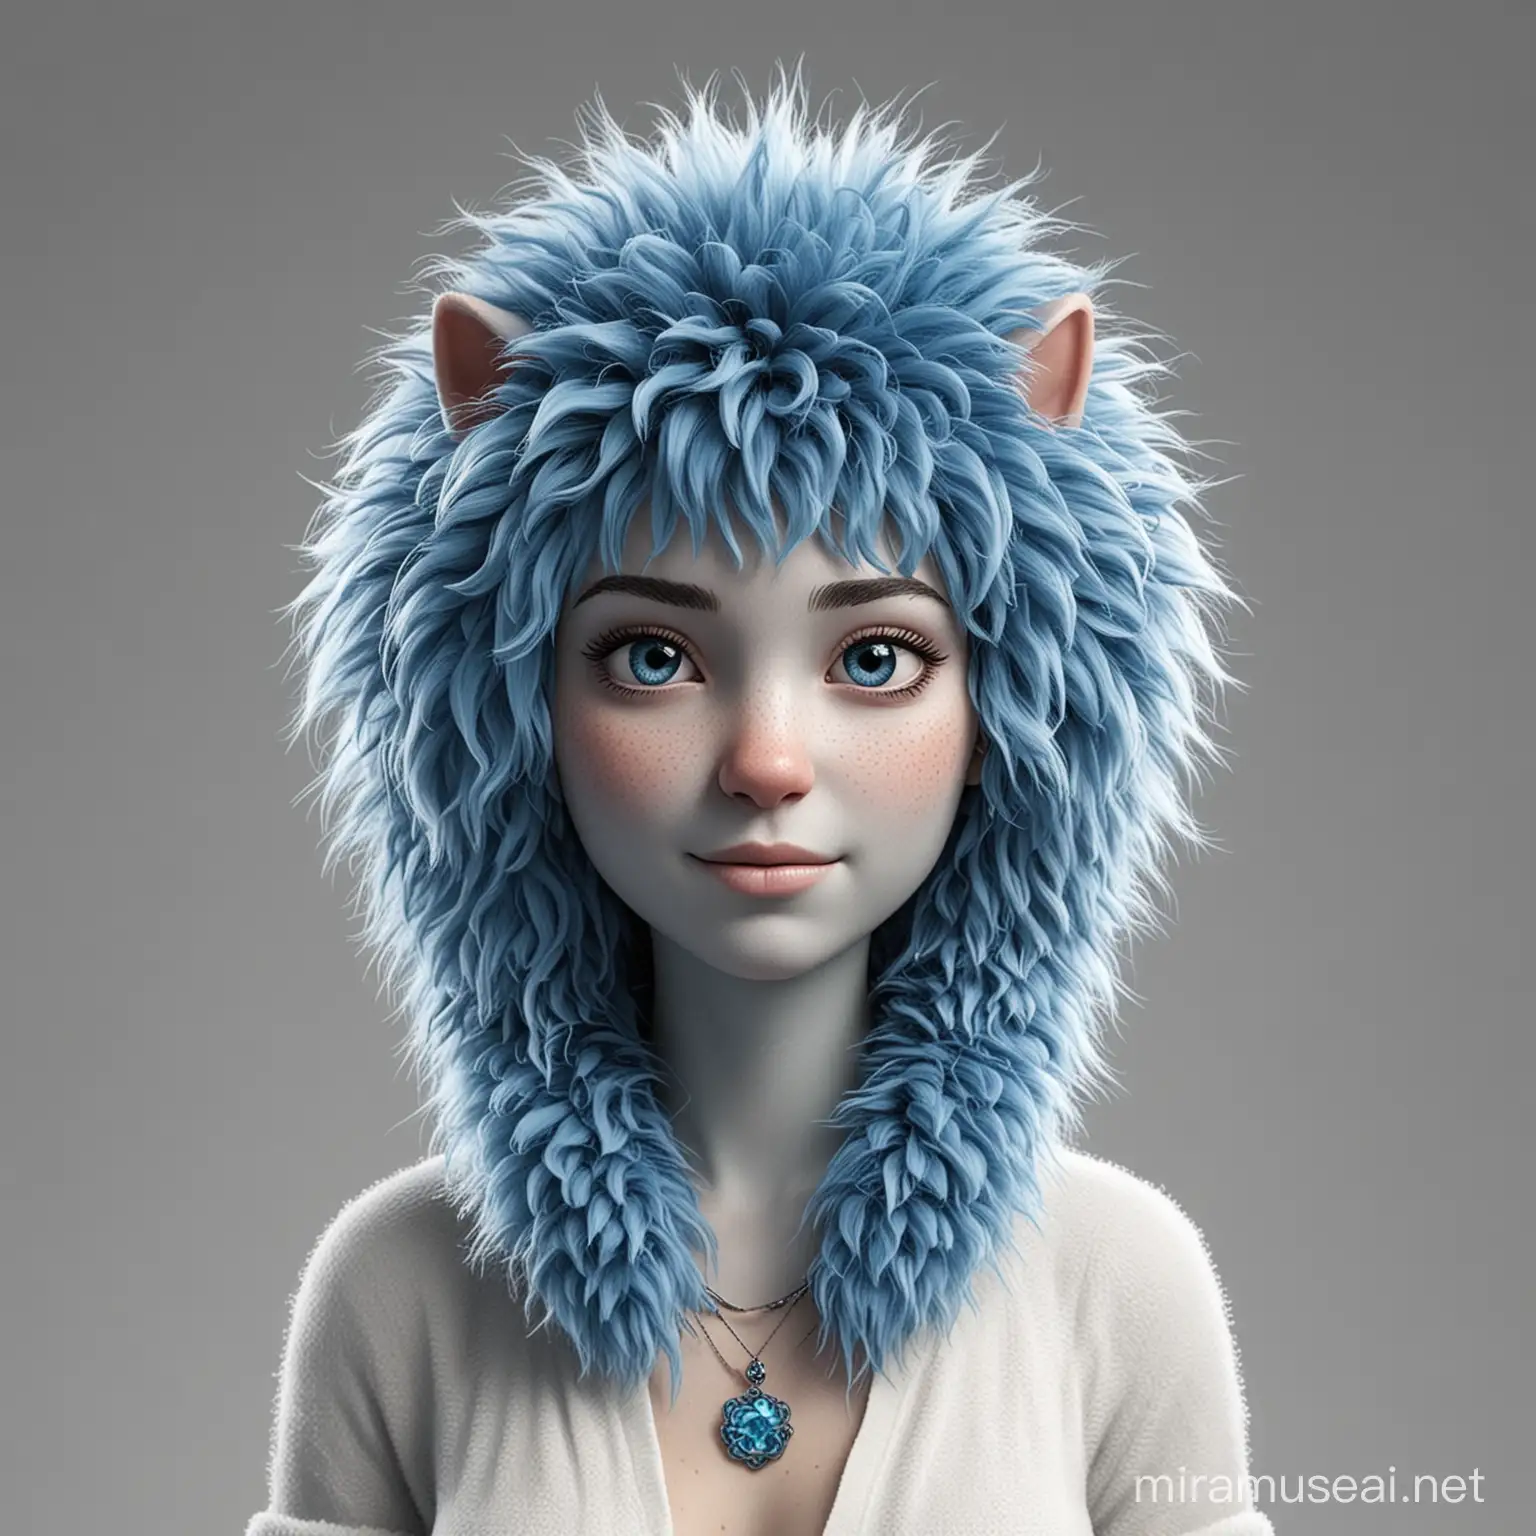 Realistic Blue Furry Avatar Person on White Background